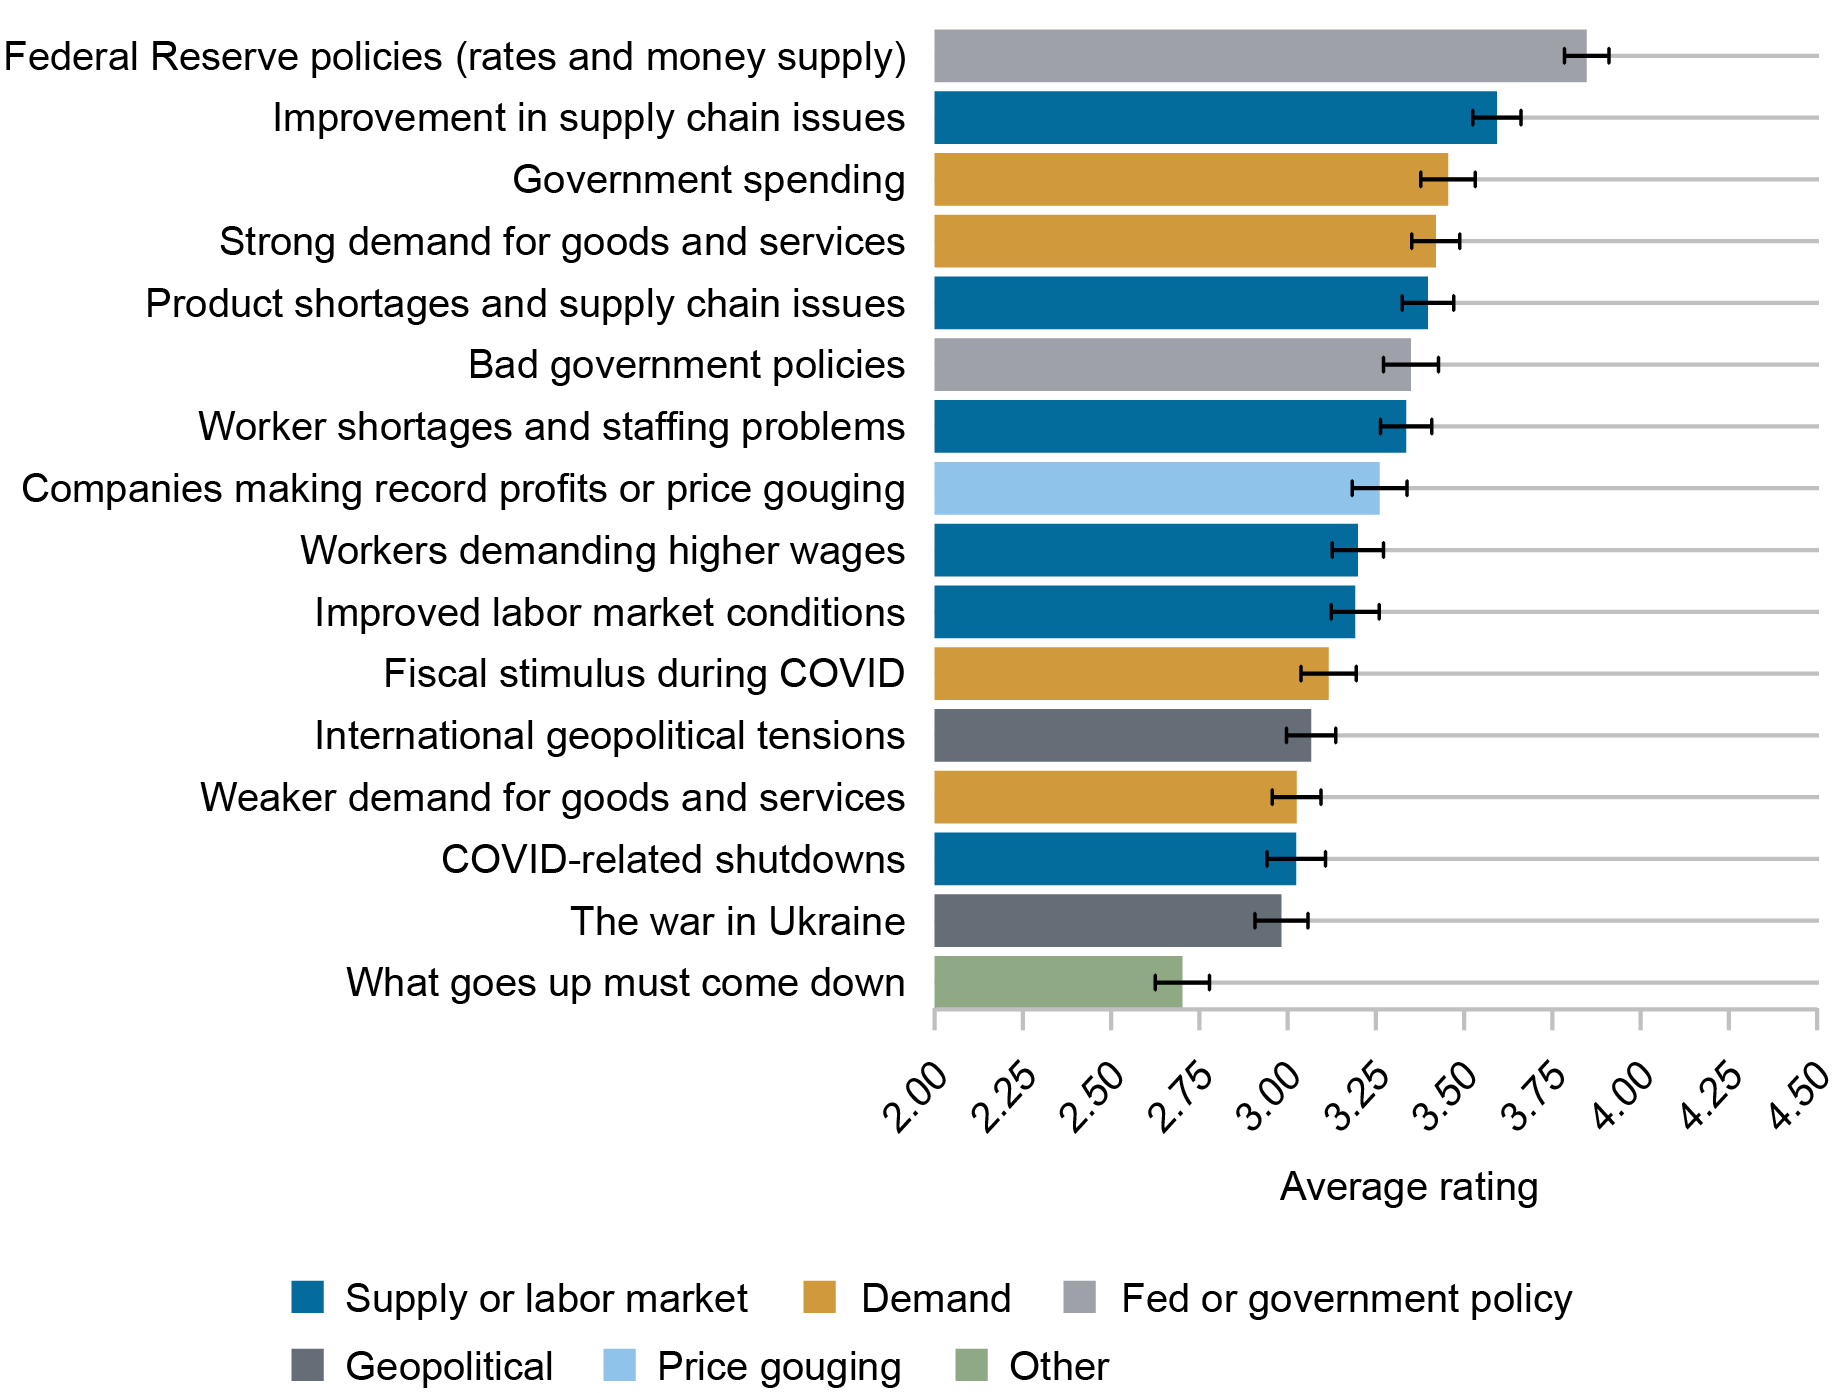 Liberty Street Economics horizontal column chart showing the average importance ratings assigned by survey respondents to each factor that contributed to lower inflation between June 2022 and June 2023.